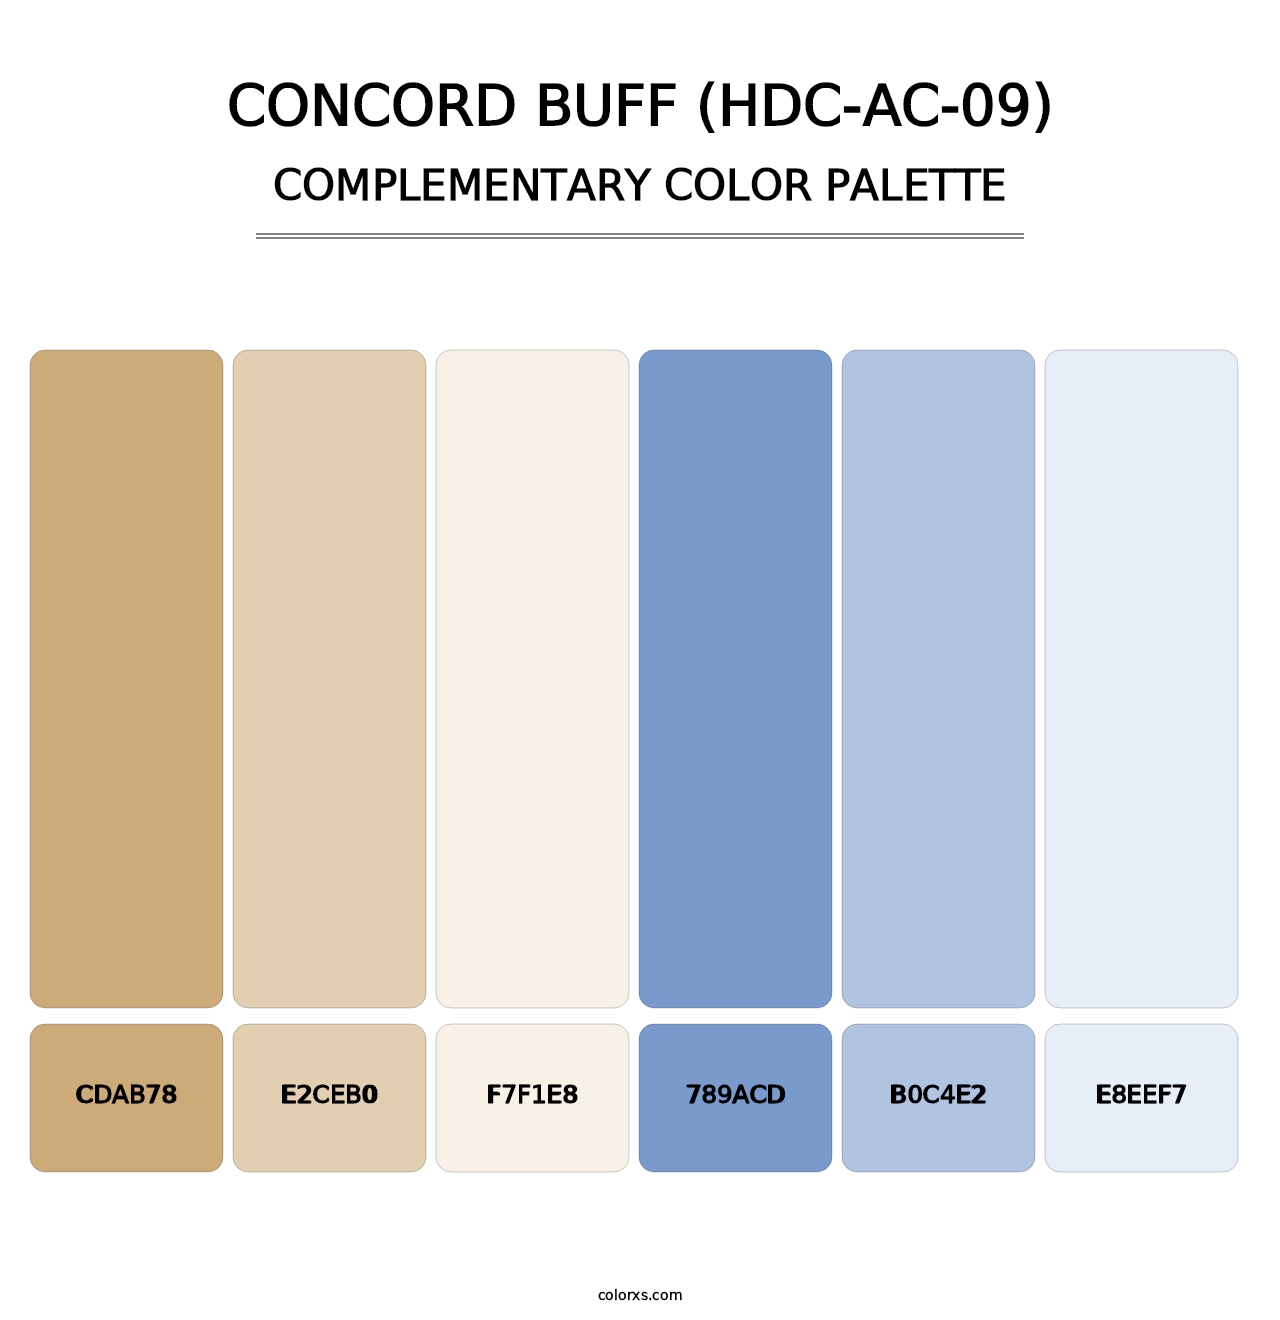 Concord Buff (HDC-AC-09) - Complementary Color Palette